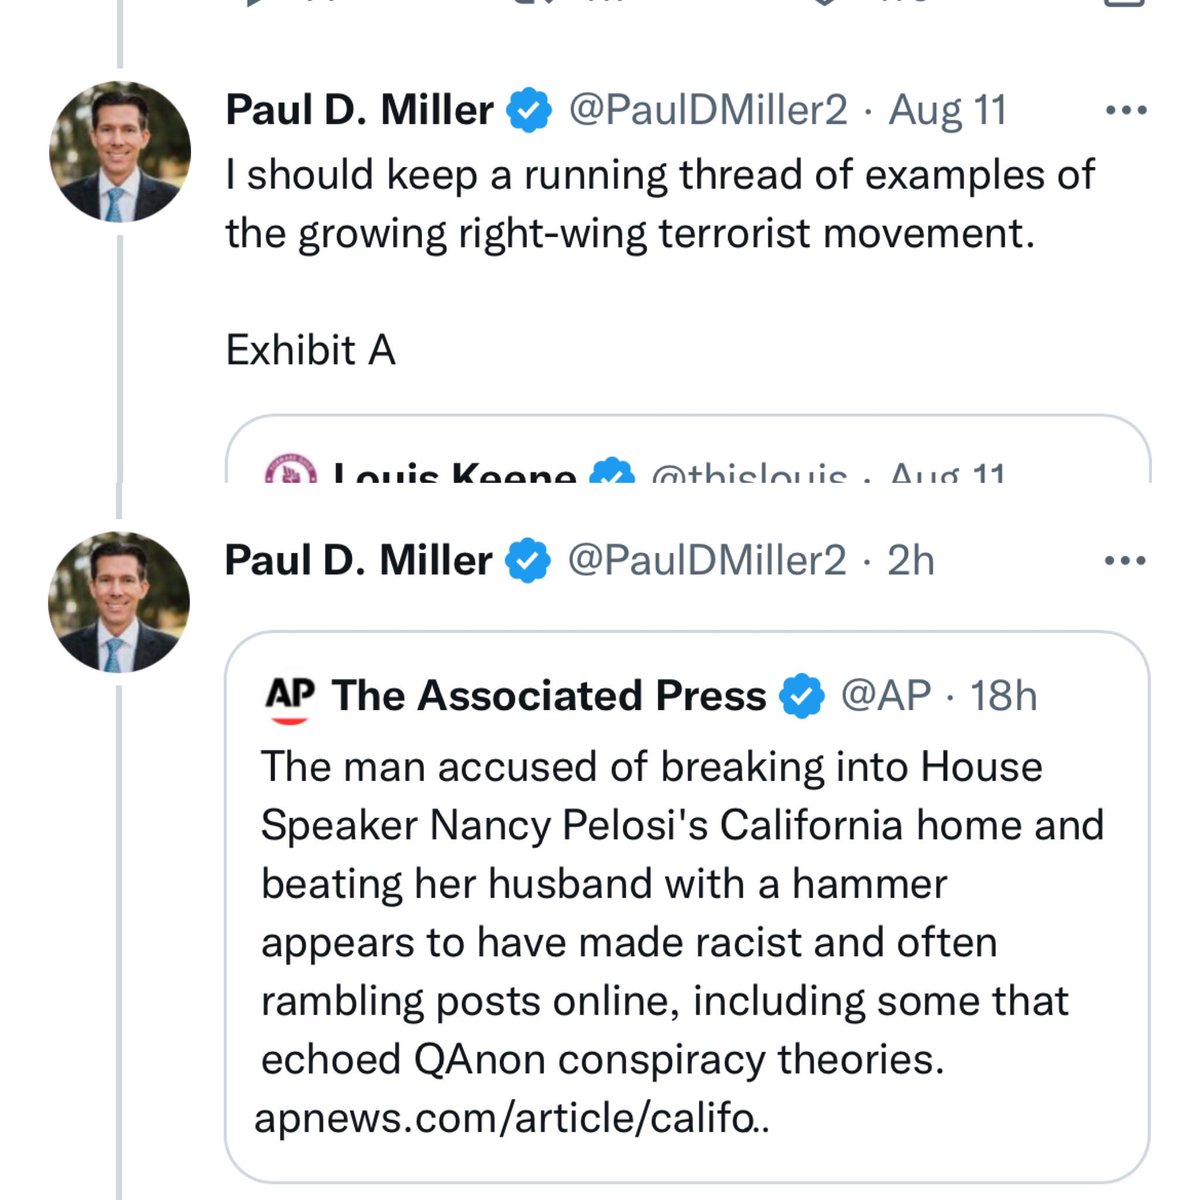 Rushing to insist an attack was politically motivated when we have little evidence that it was (& in fact, much evidence that suggests it wasn’t) actually RATCHETS UP political tensions even further. As French & Miller have done here by characterizing this as rightwing violence